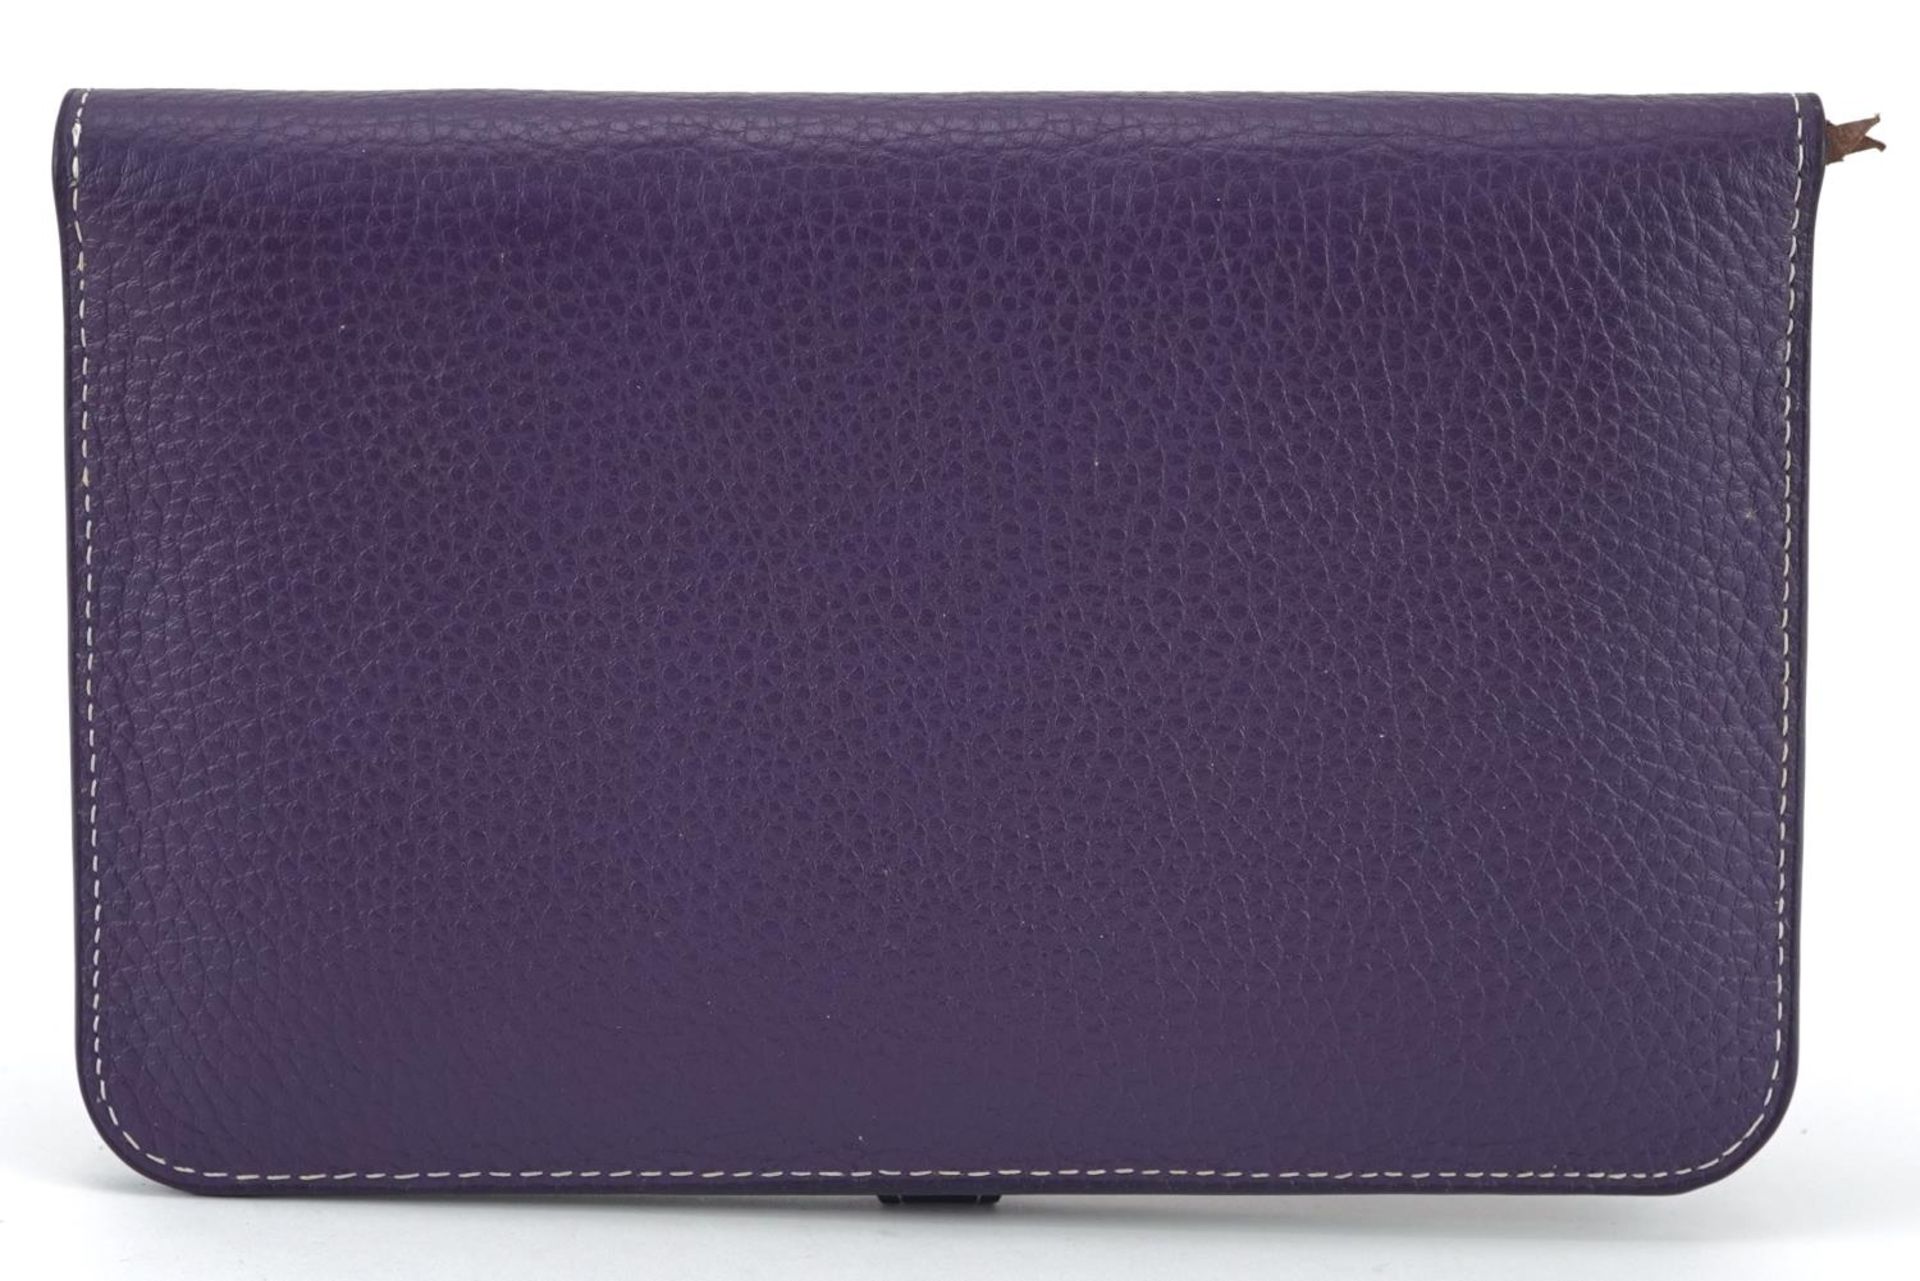 Hermes, French purple leather clutch purse with cardholder, dust bag and box, the clutch bag 19. - Bild 6 aus 6